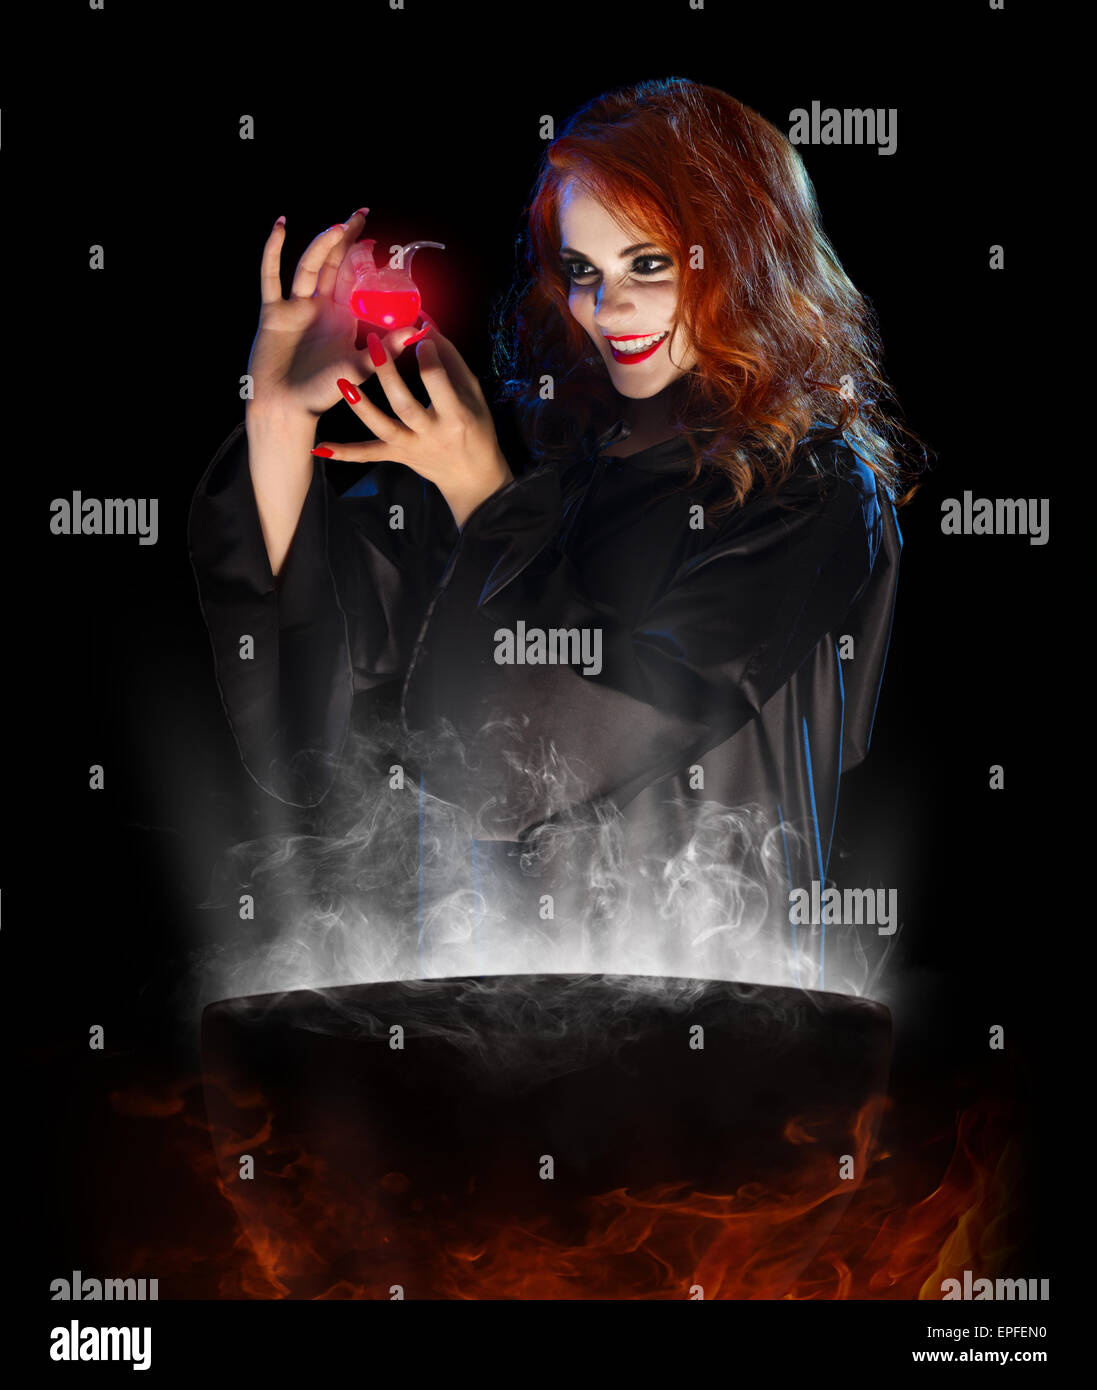 Young witch with red potion and cauldron isolated Stock Photo